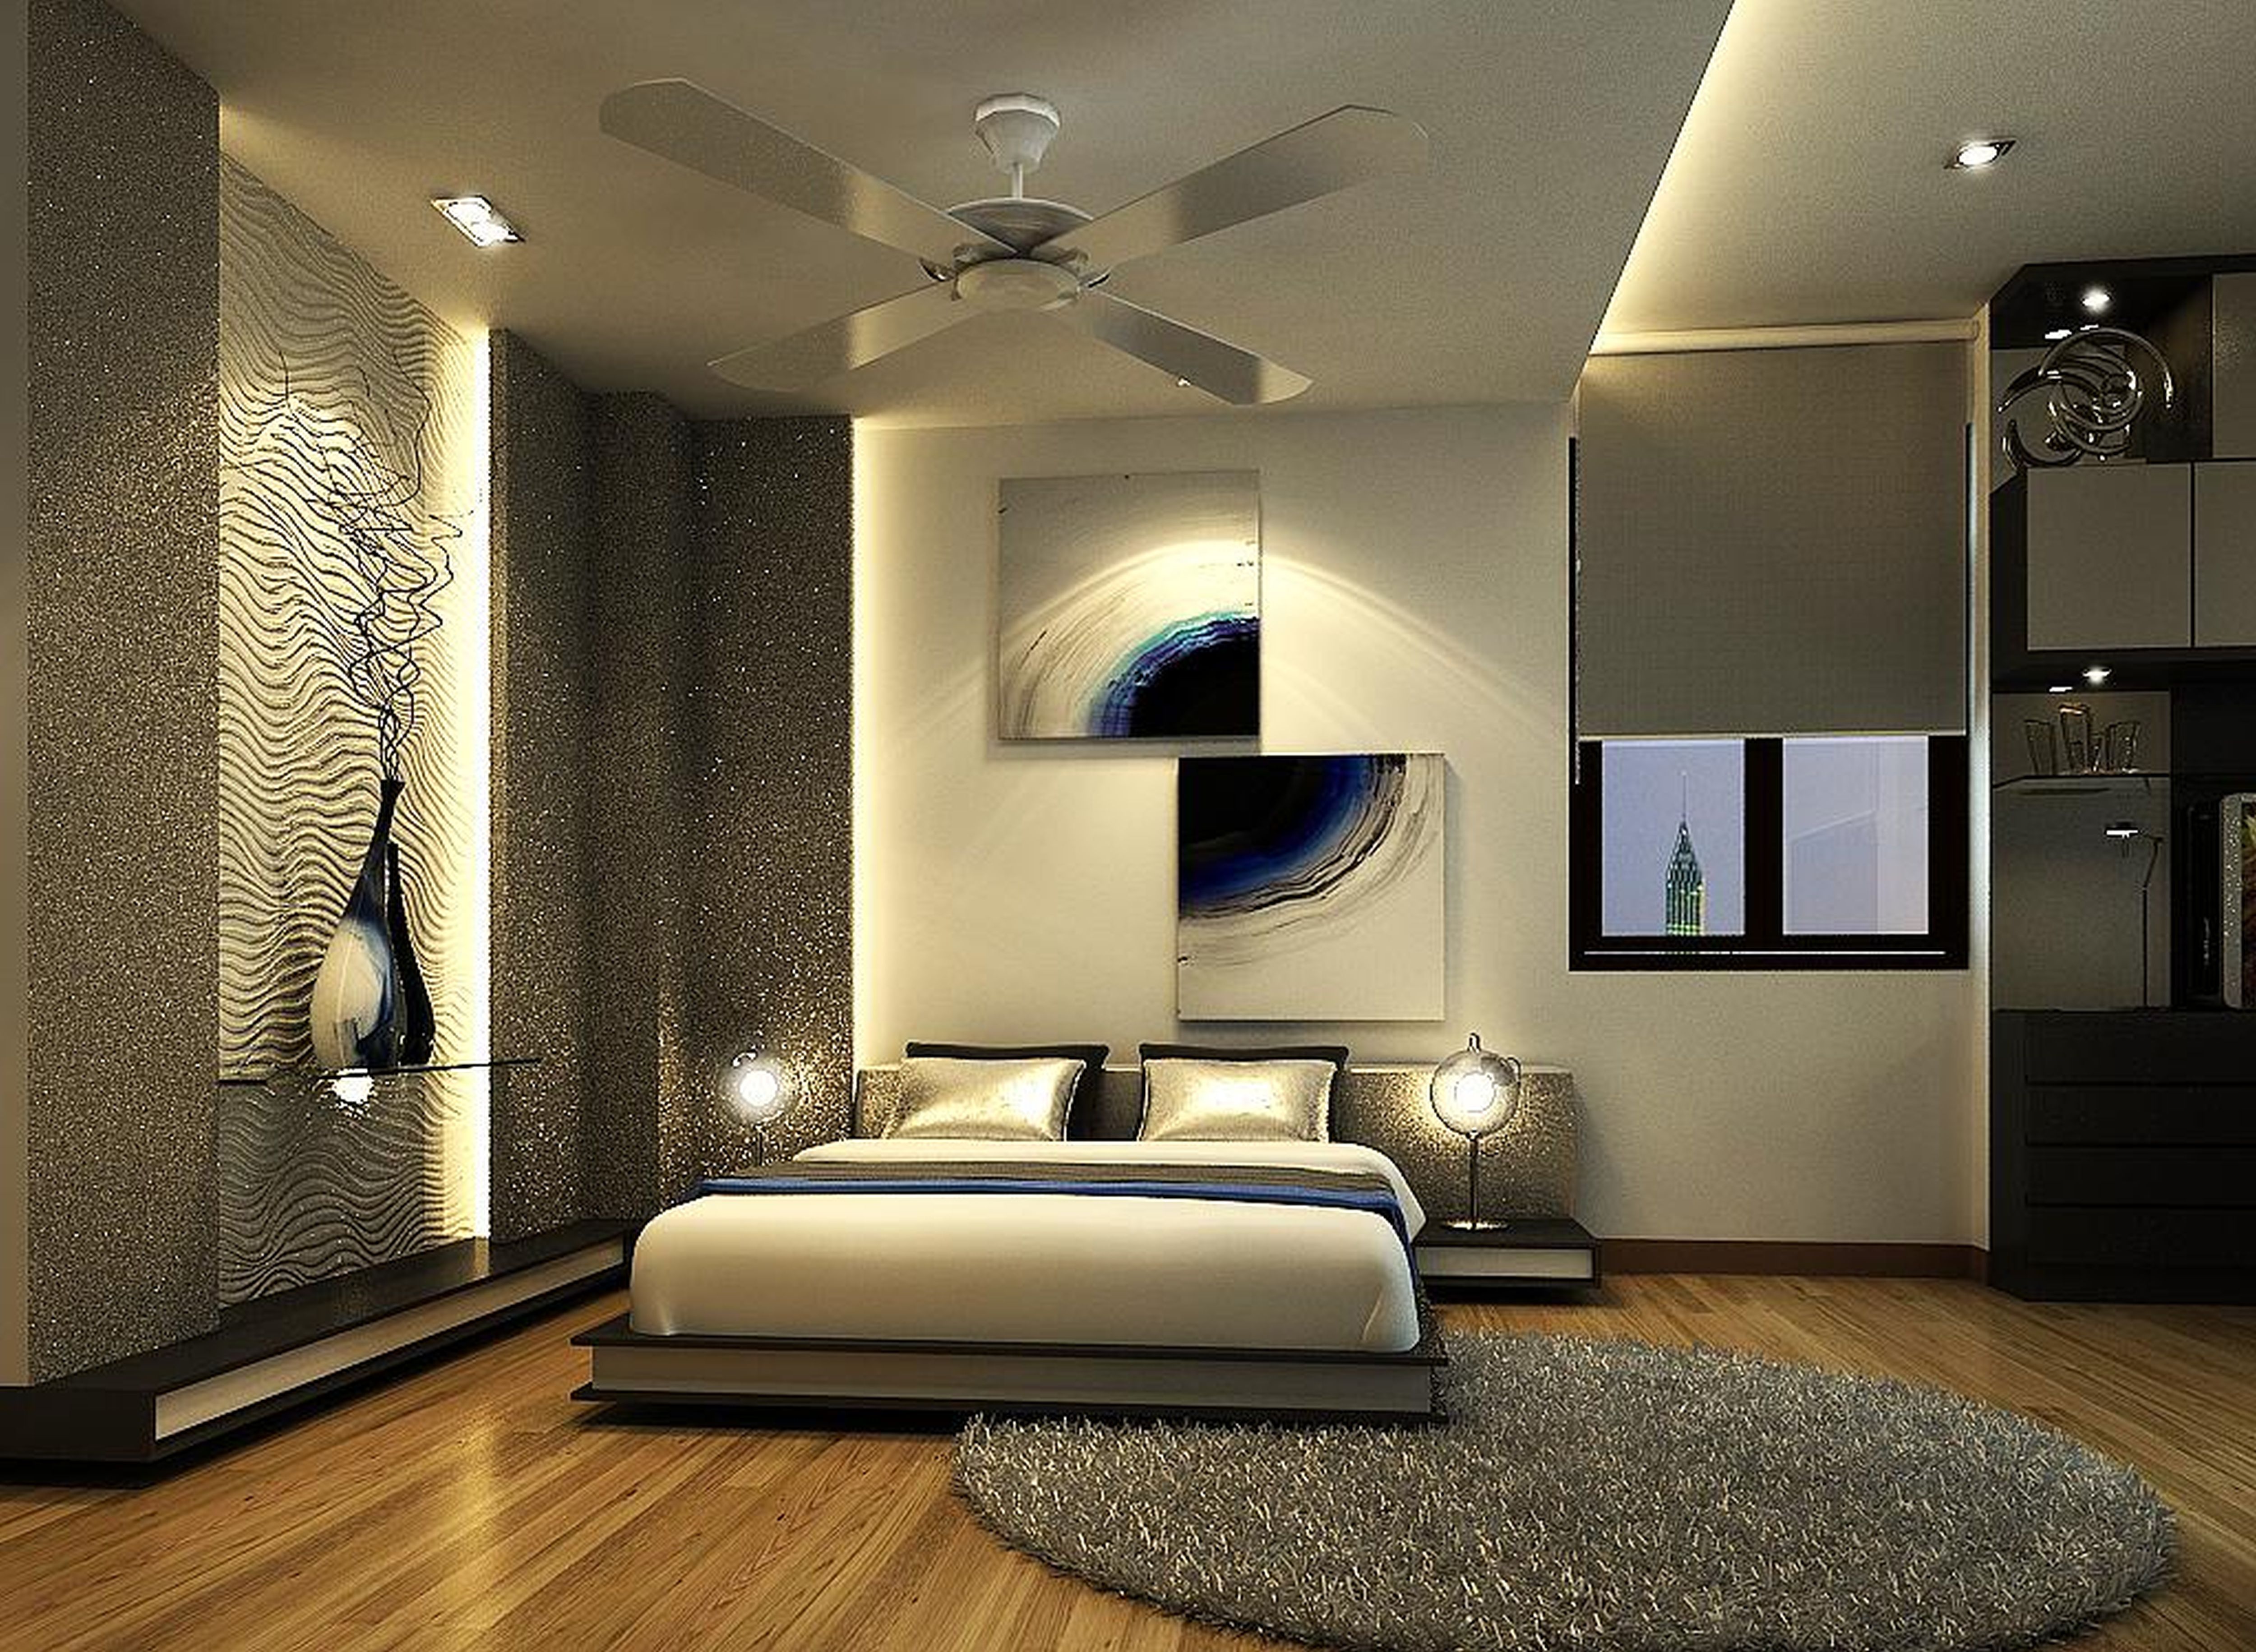 Pictures Of Decorating Ideas For Bedrooms